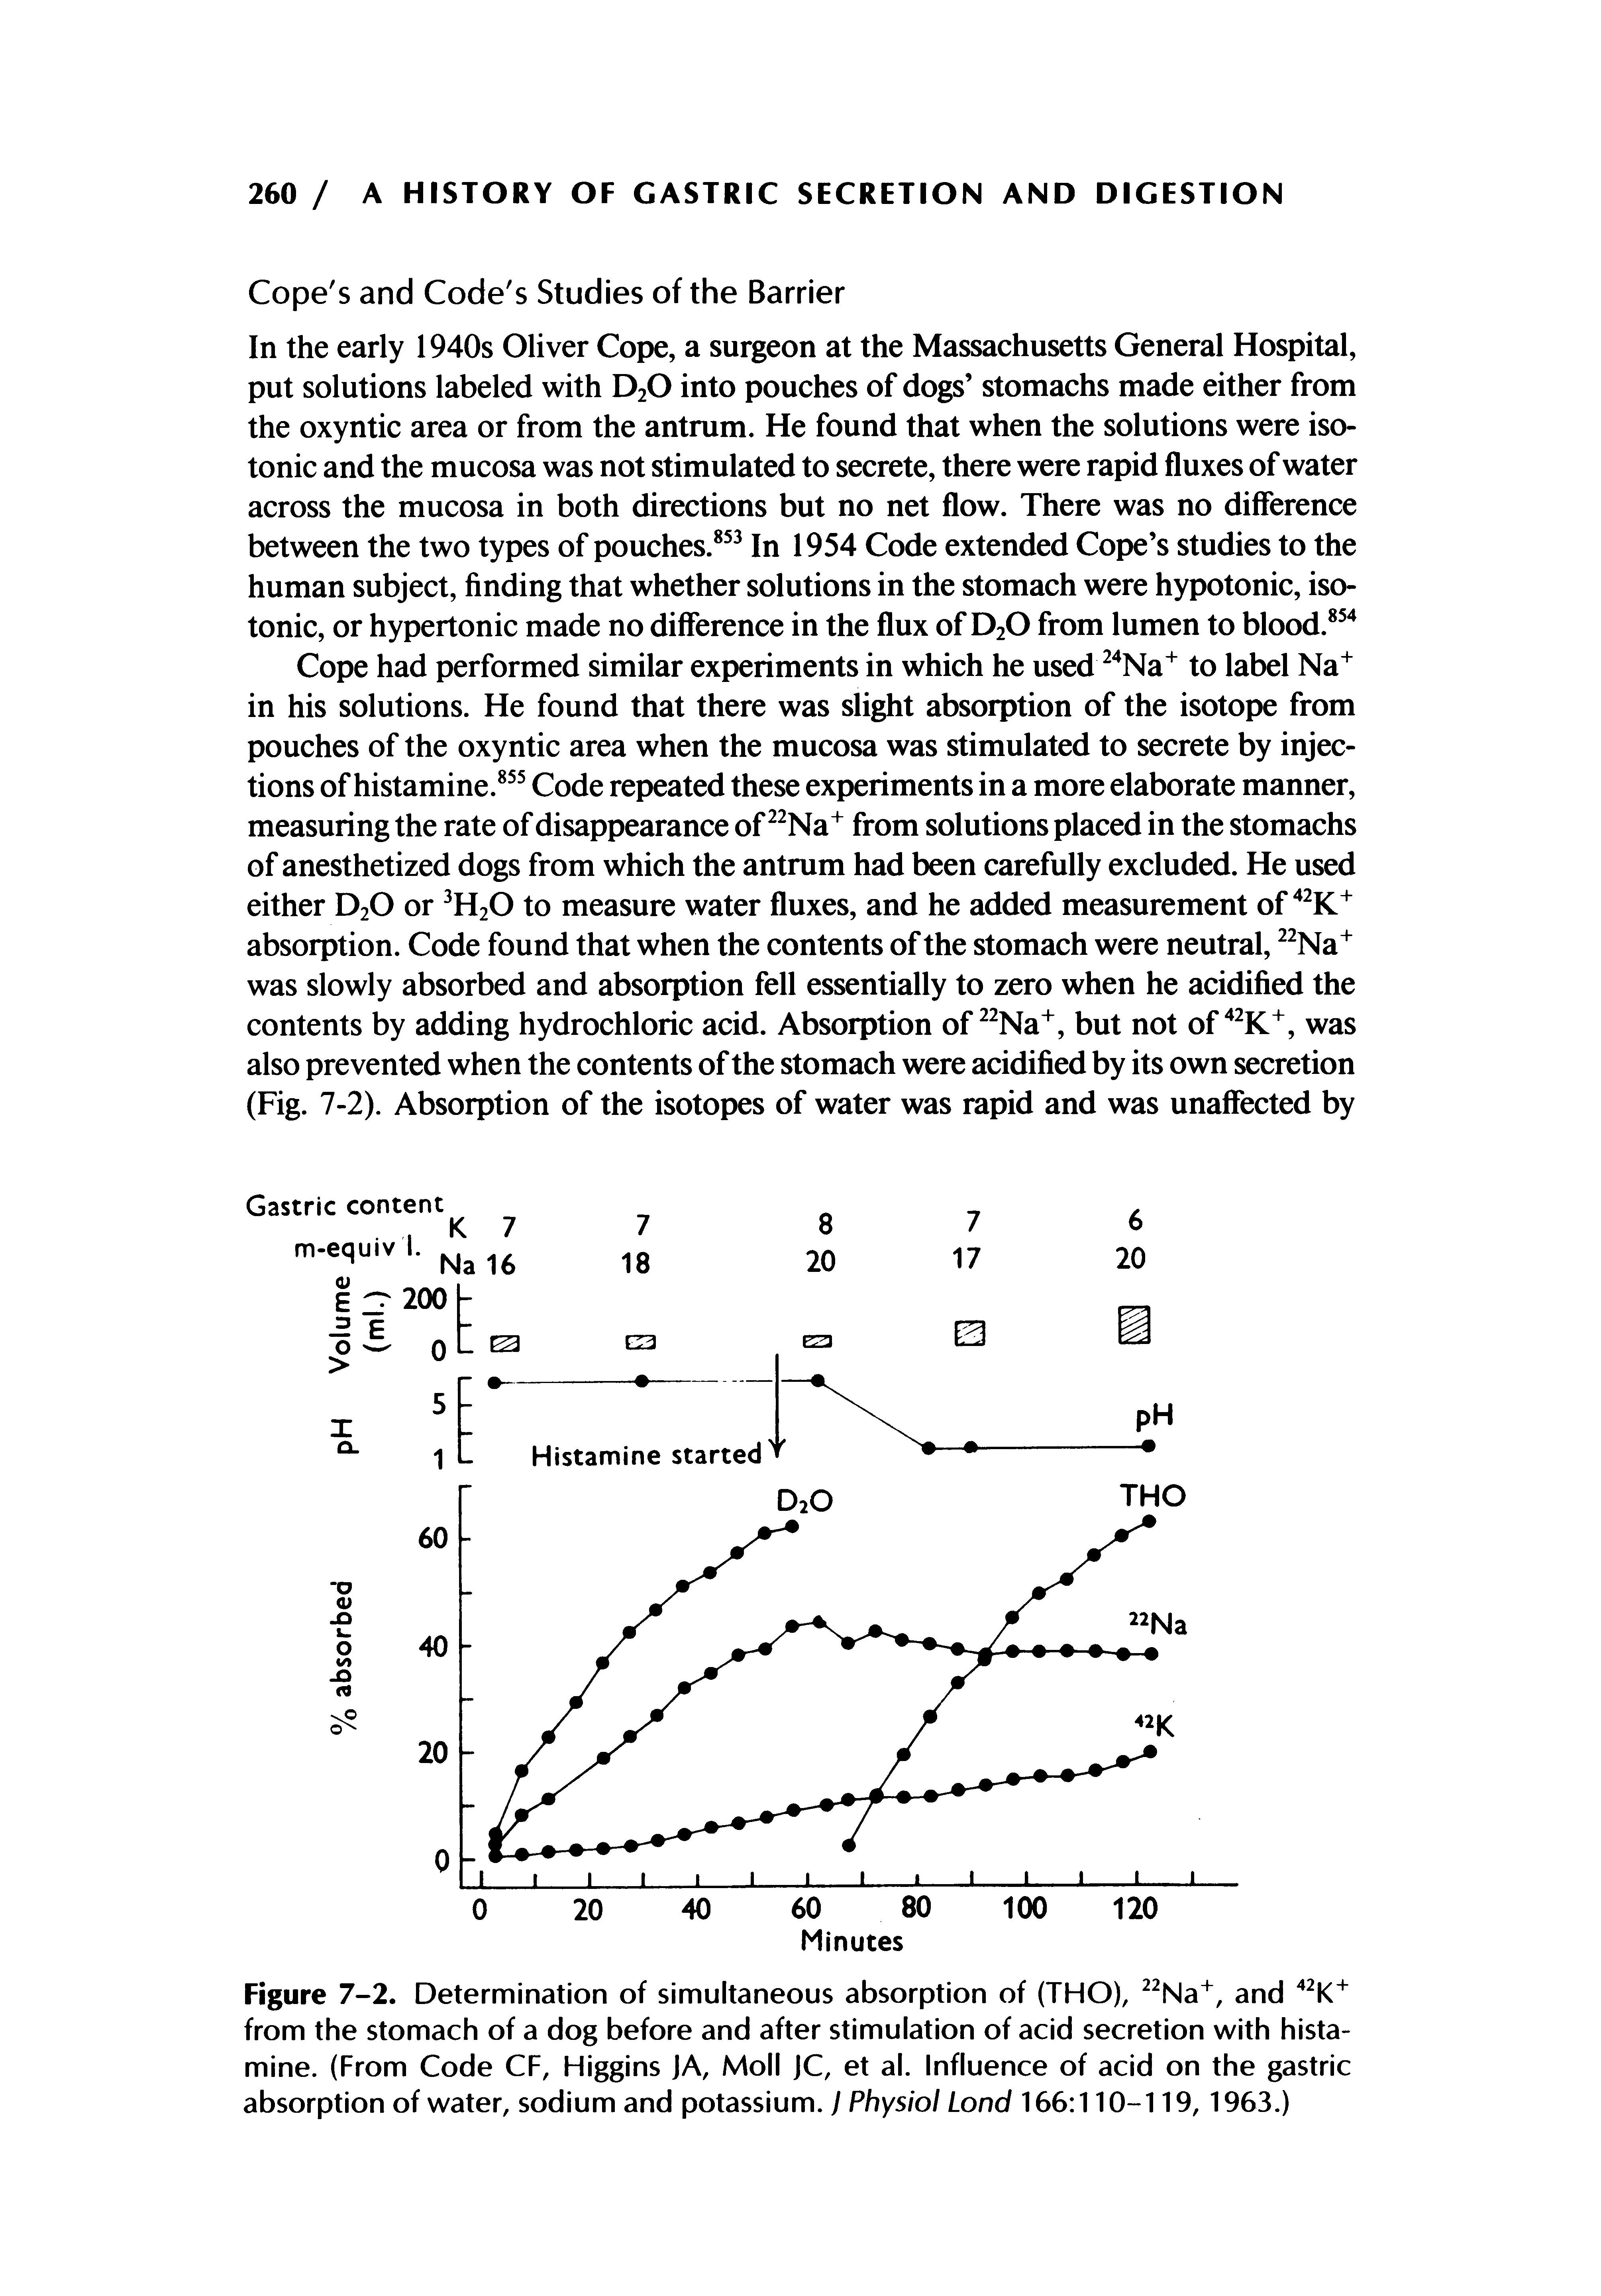 Figure 7-2. Determination of simultaneous absorption of (THO), Na, and from the stomach of a dog before and after stimulation of acid secretion with histamine. (From Code CF, Higgins JA, Moll JC, et al. Influence of acid on the gastric absorption of water, sodium and potassium. I Physiol Lond 166 110-119, 1963.)...